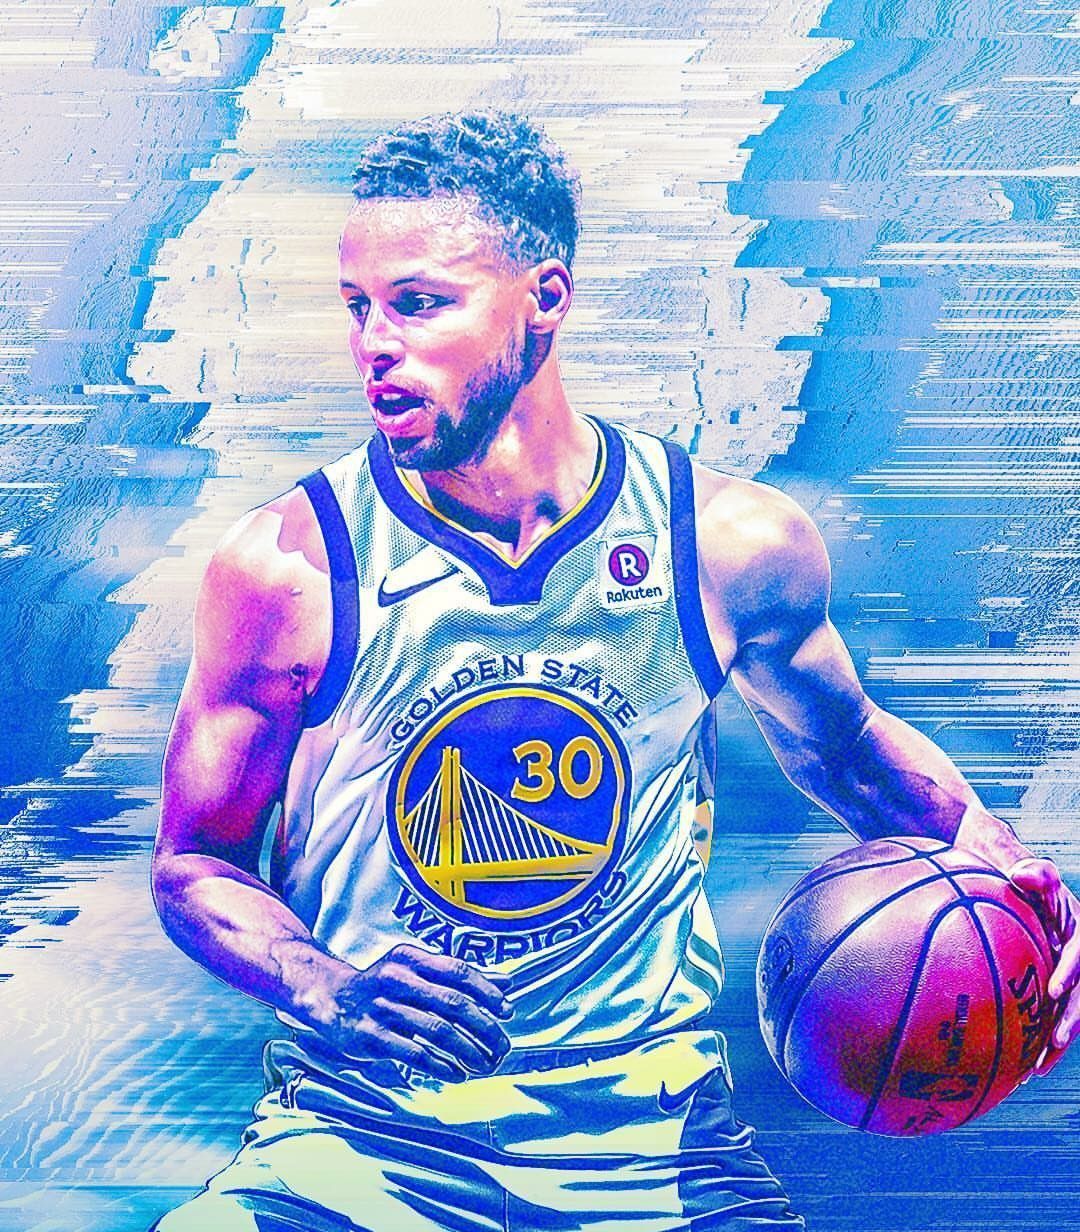 Cool Stephen Curry Wallpapers - Wallpaper Cave